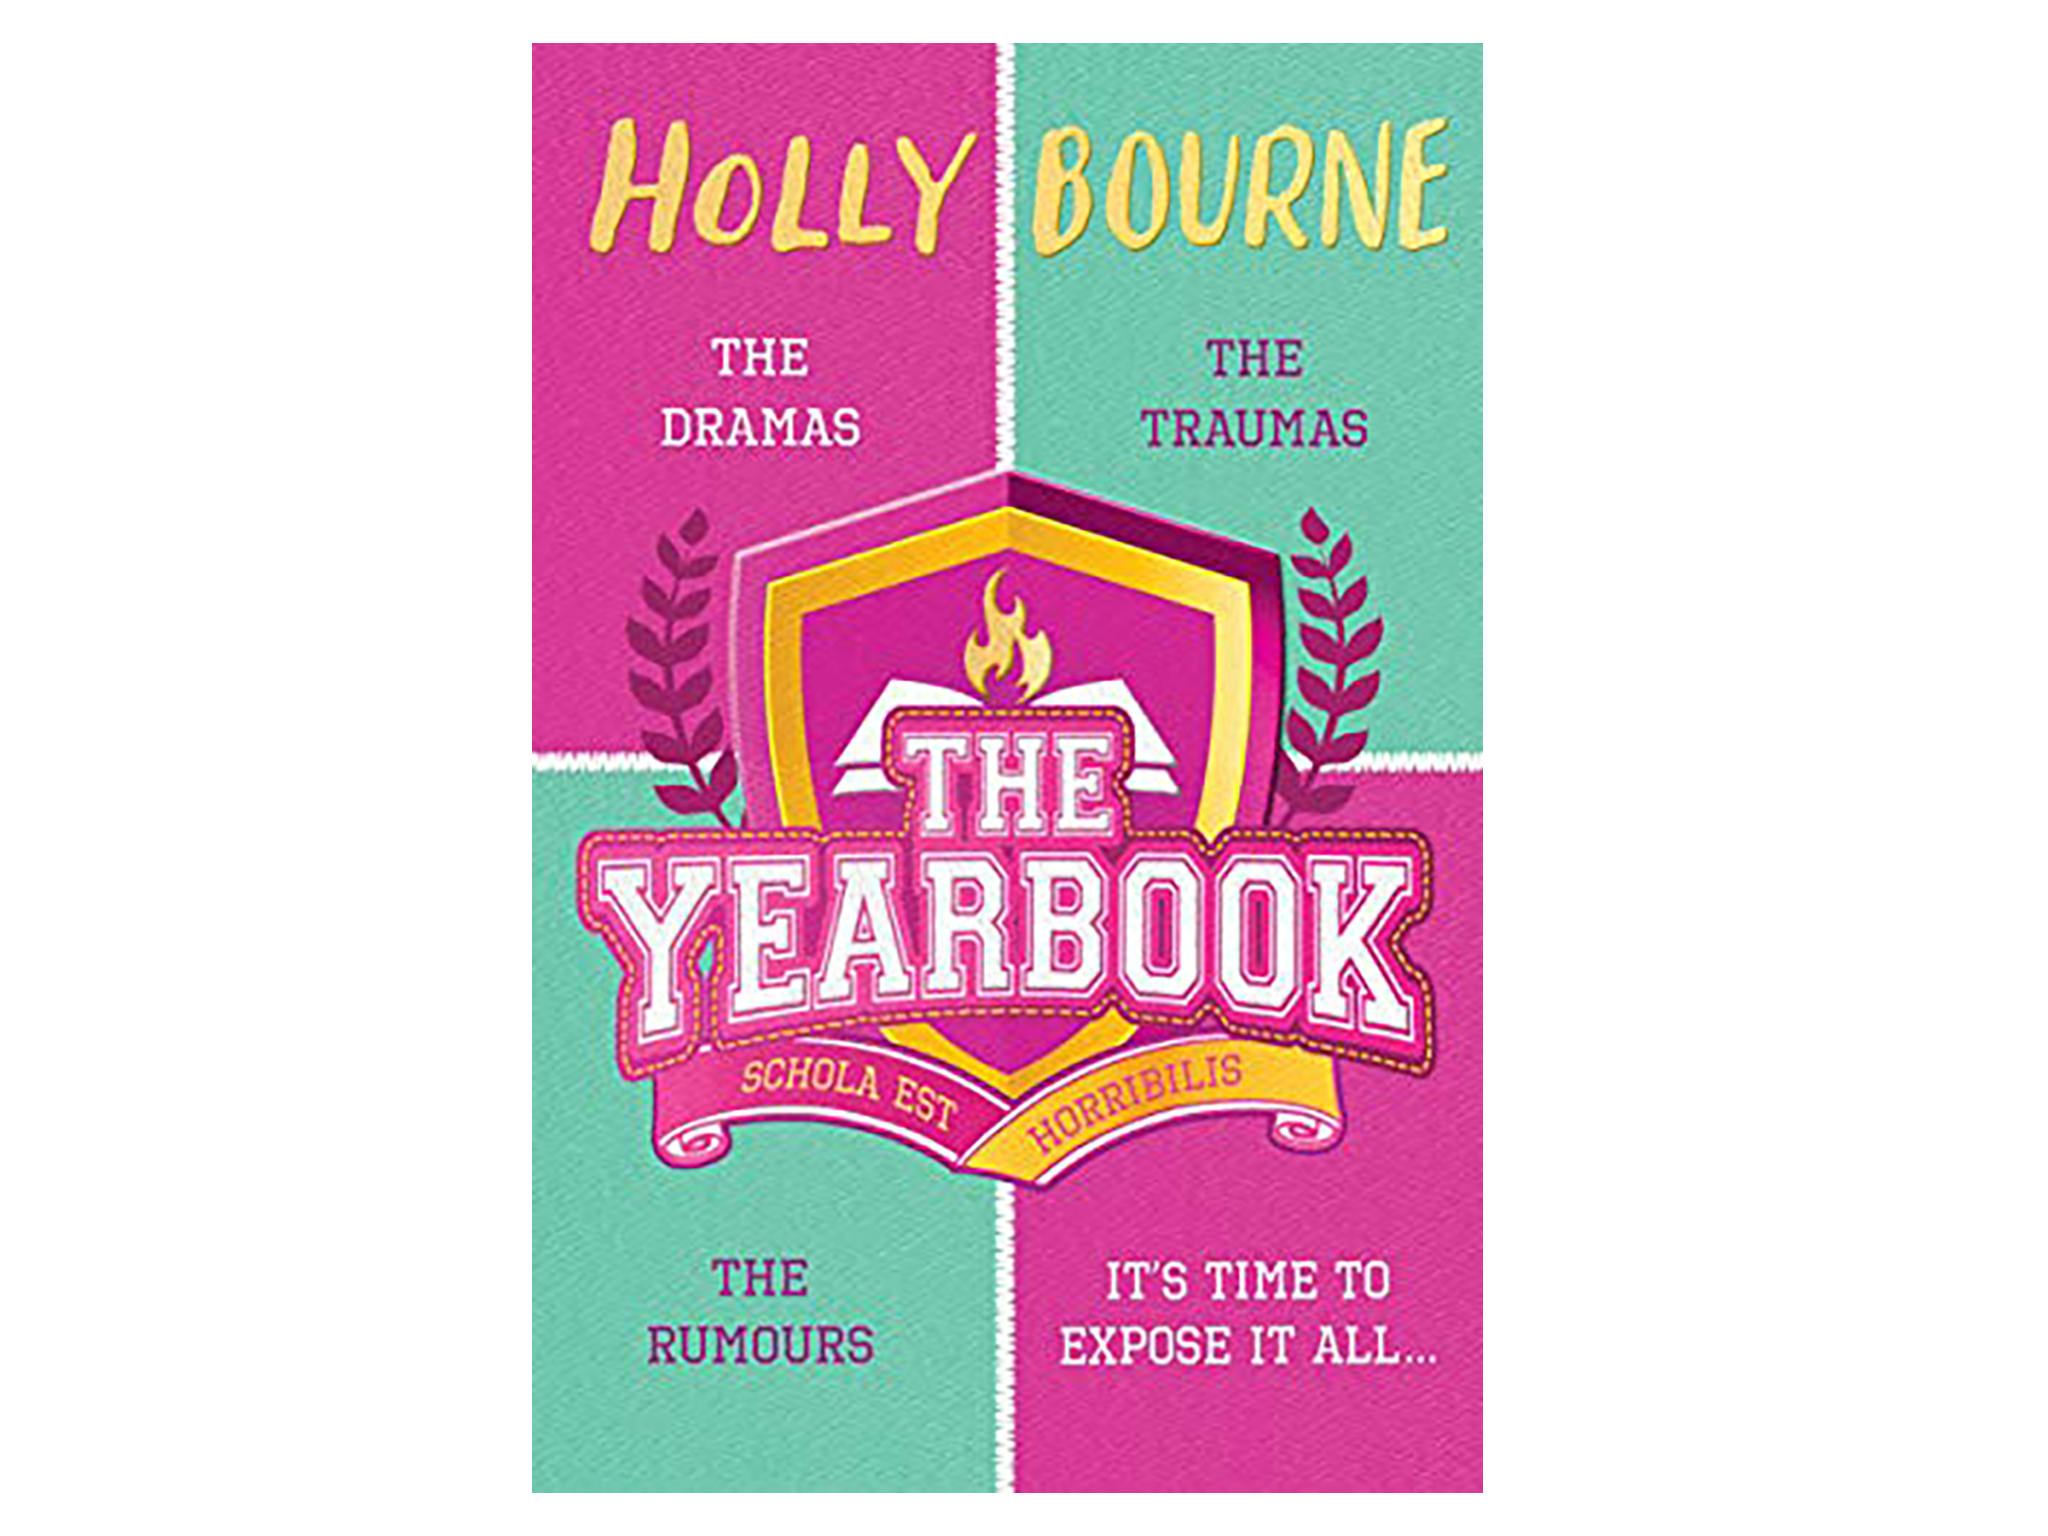 The Yearbook by Holly Bourne